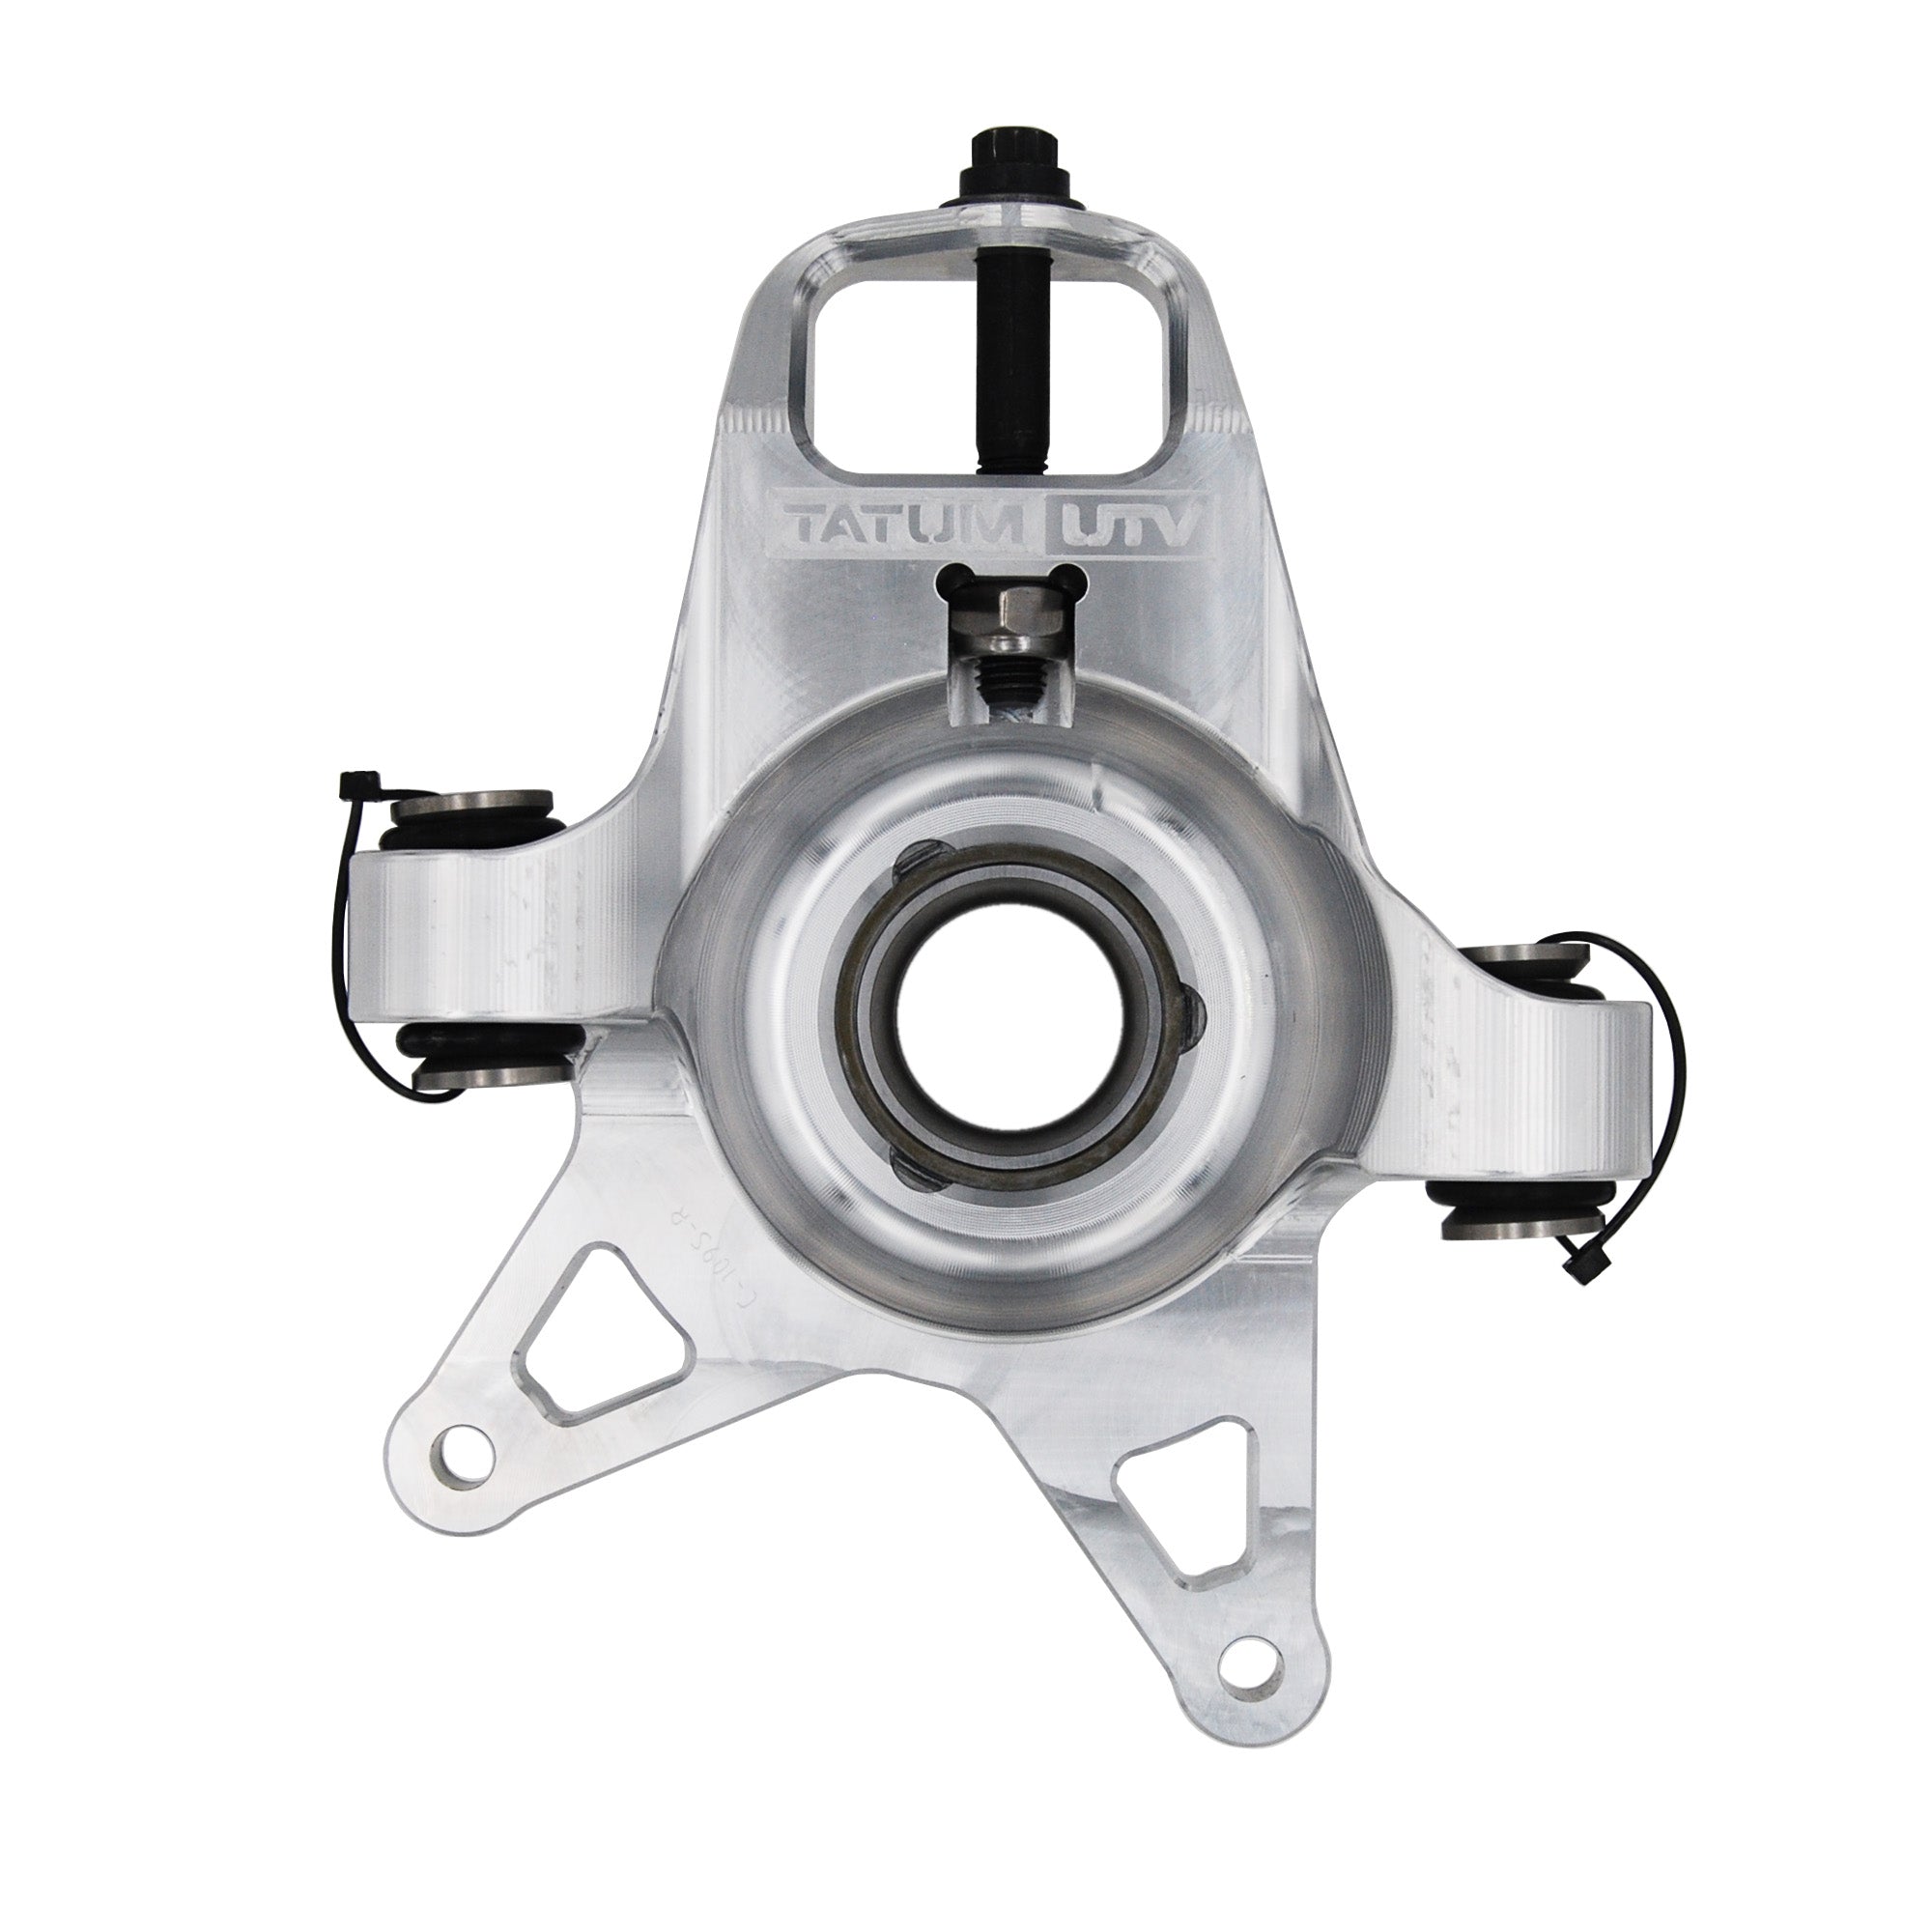 Capped Can-Am X3 Billet Rear Knuckle/Spindle Set